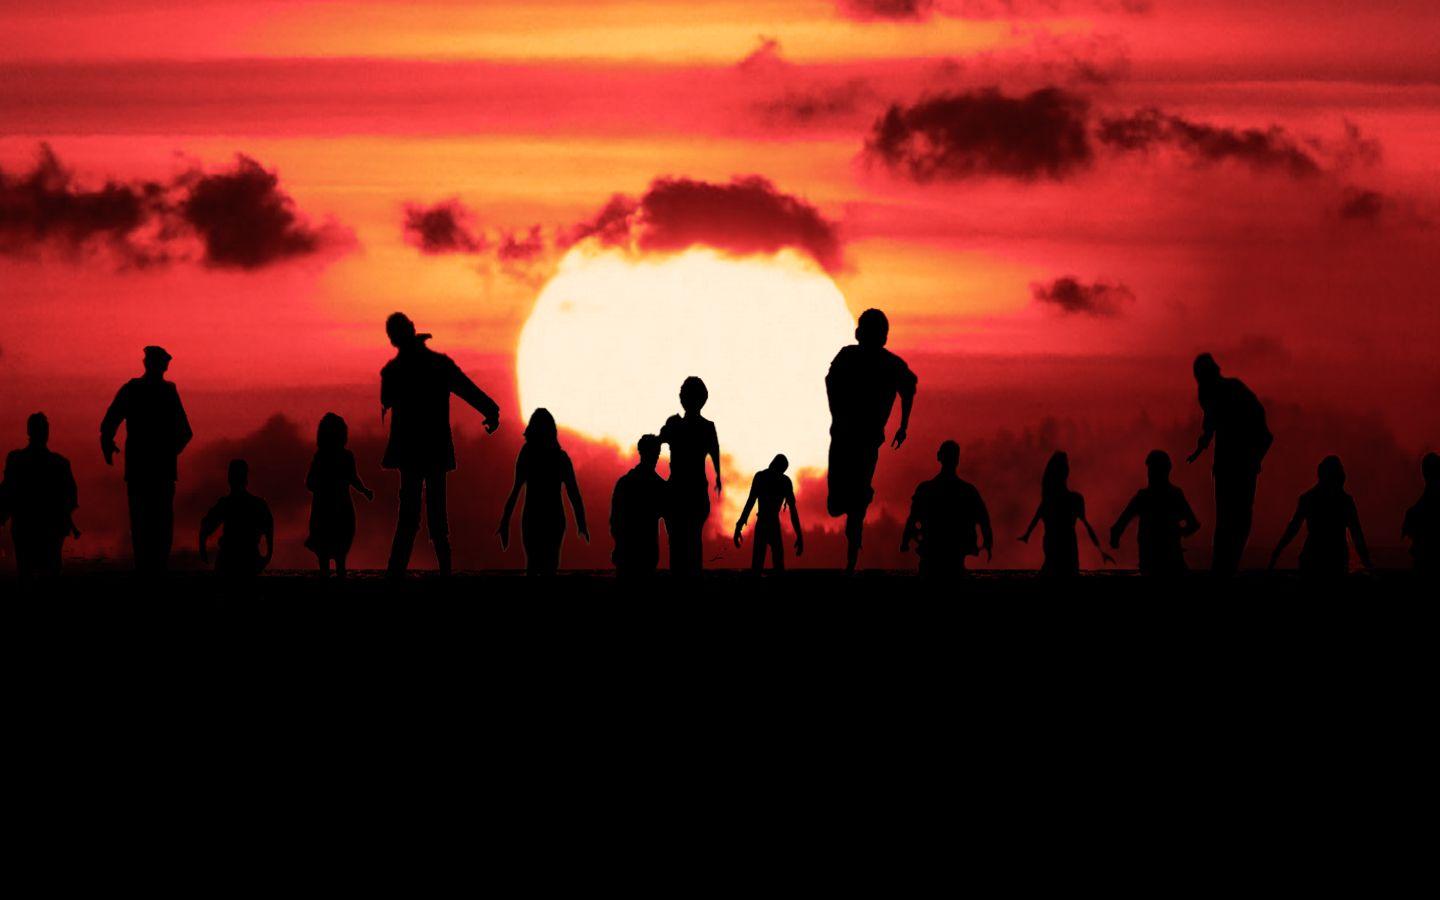 Zombie Silhouette Wallpaper Picture 52292 1440x900 px